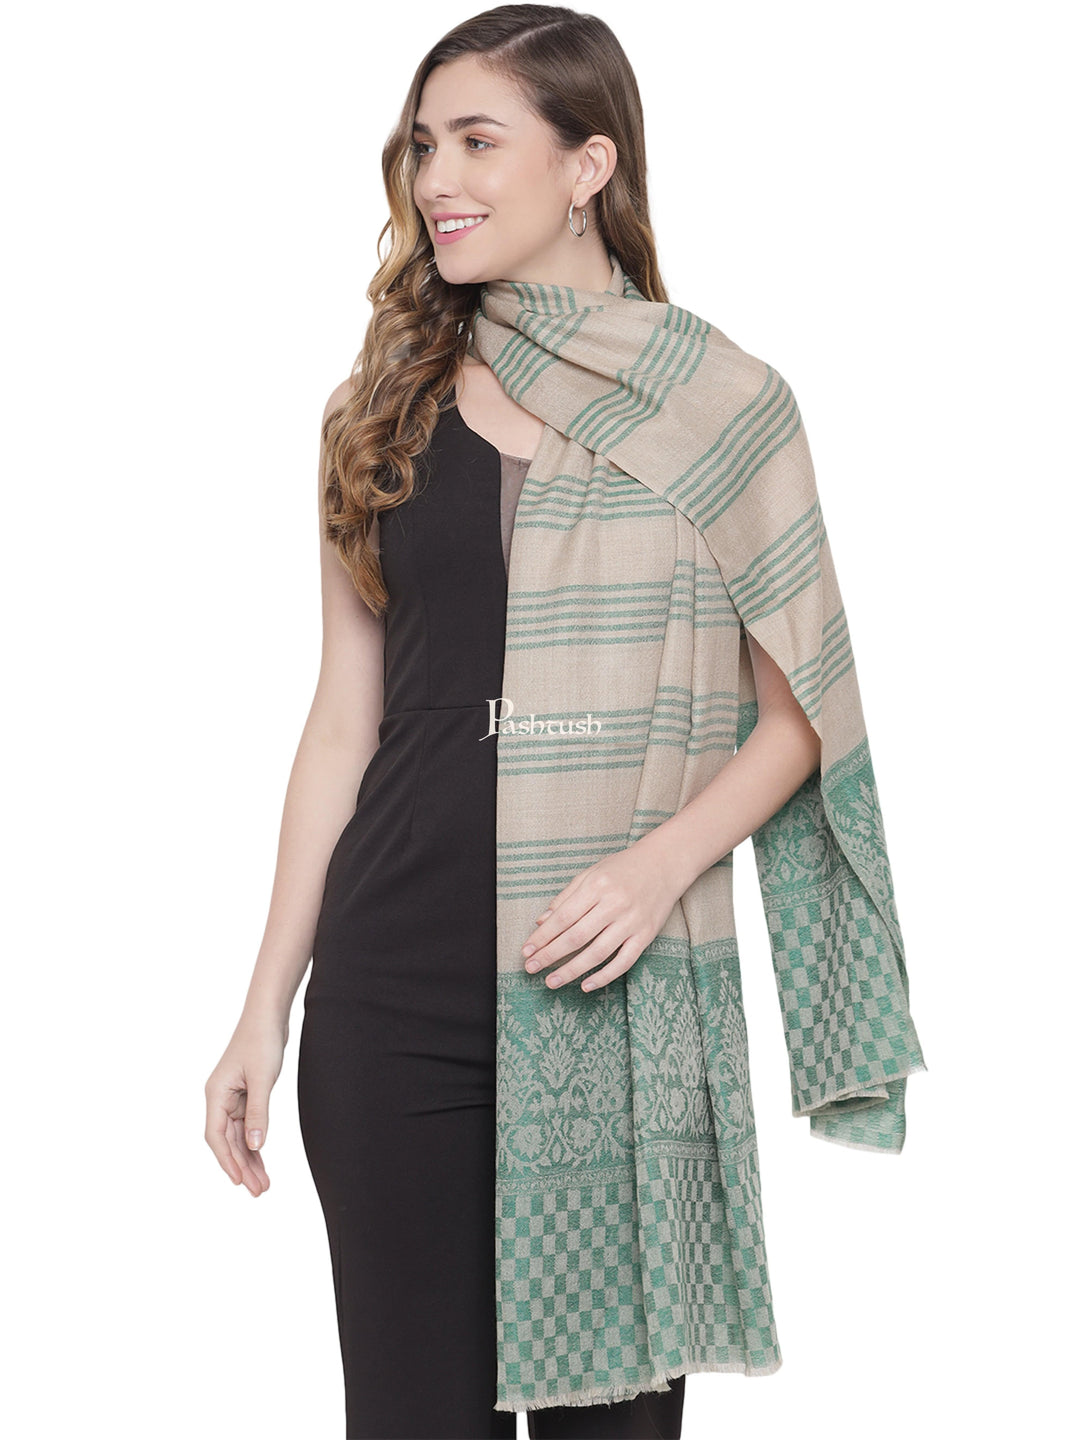 Pashtush India Womens Stoles and Scarves Scarf Pashtush Womens, Fine Wool Stole, Striped Weave, Beige and Green